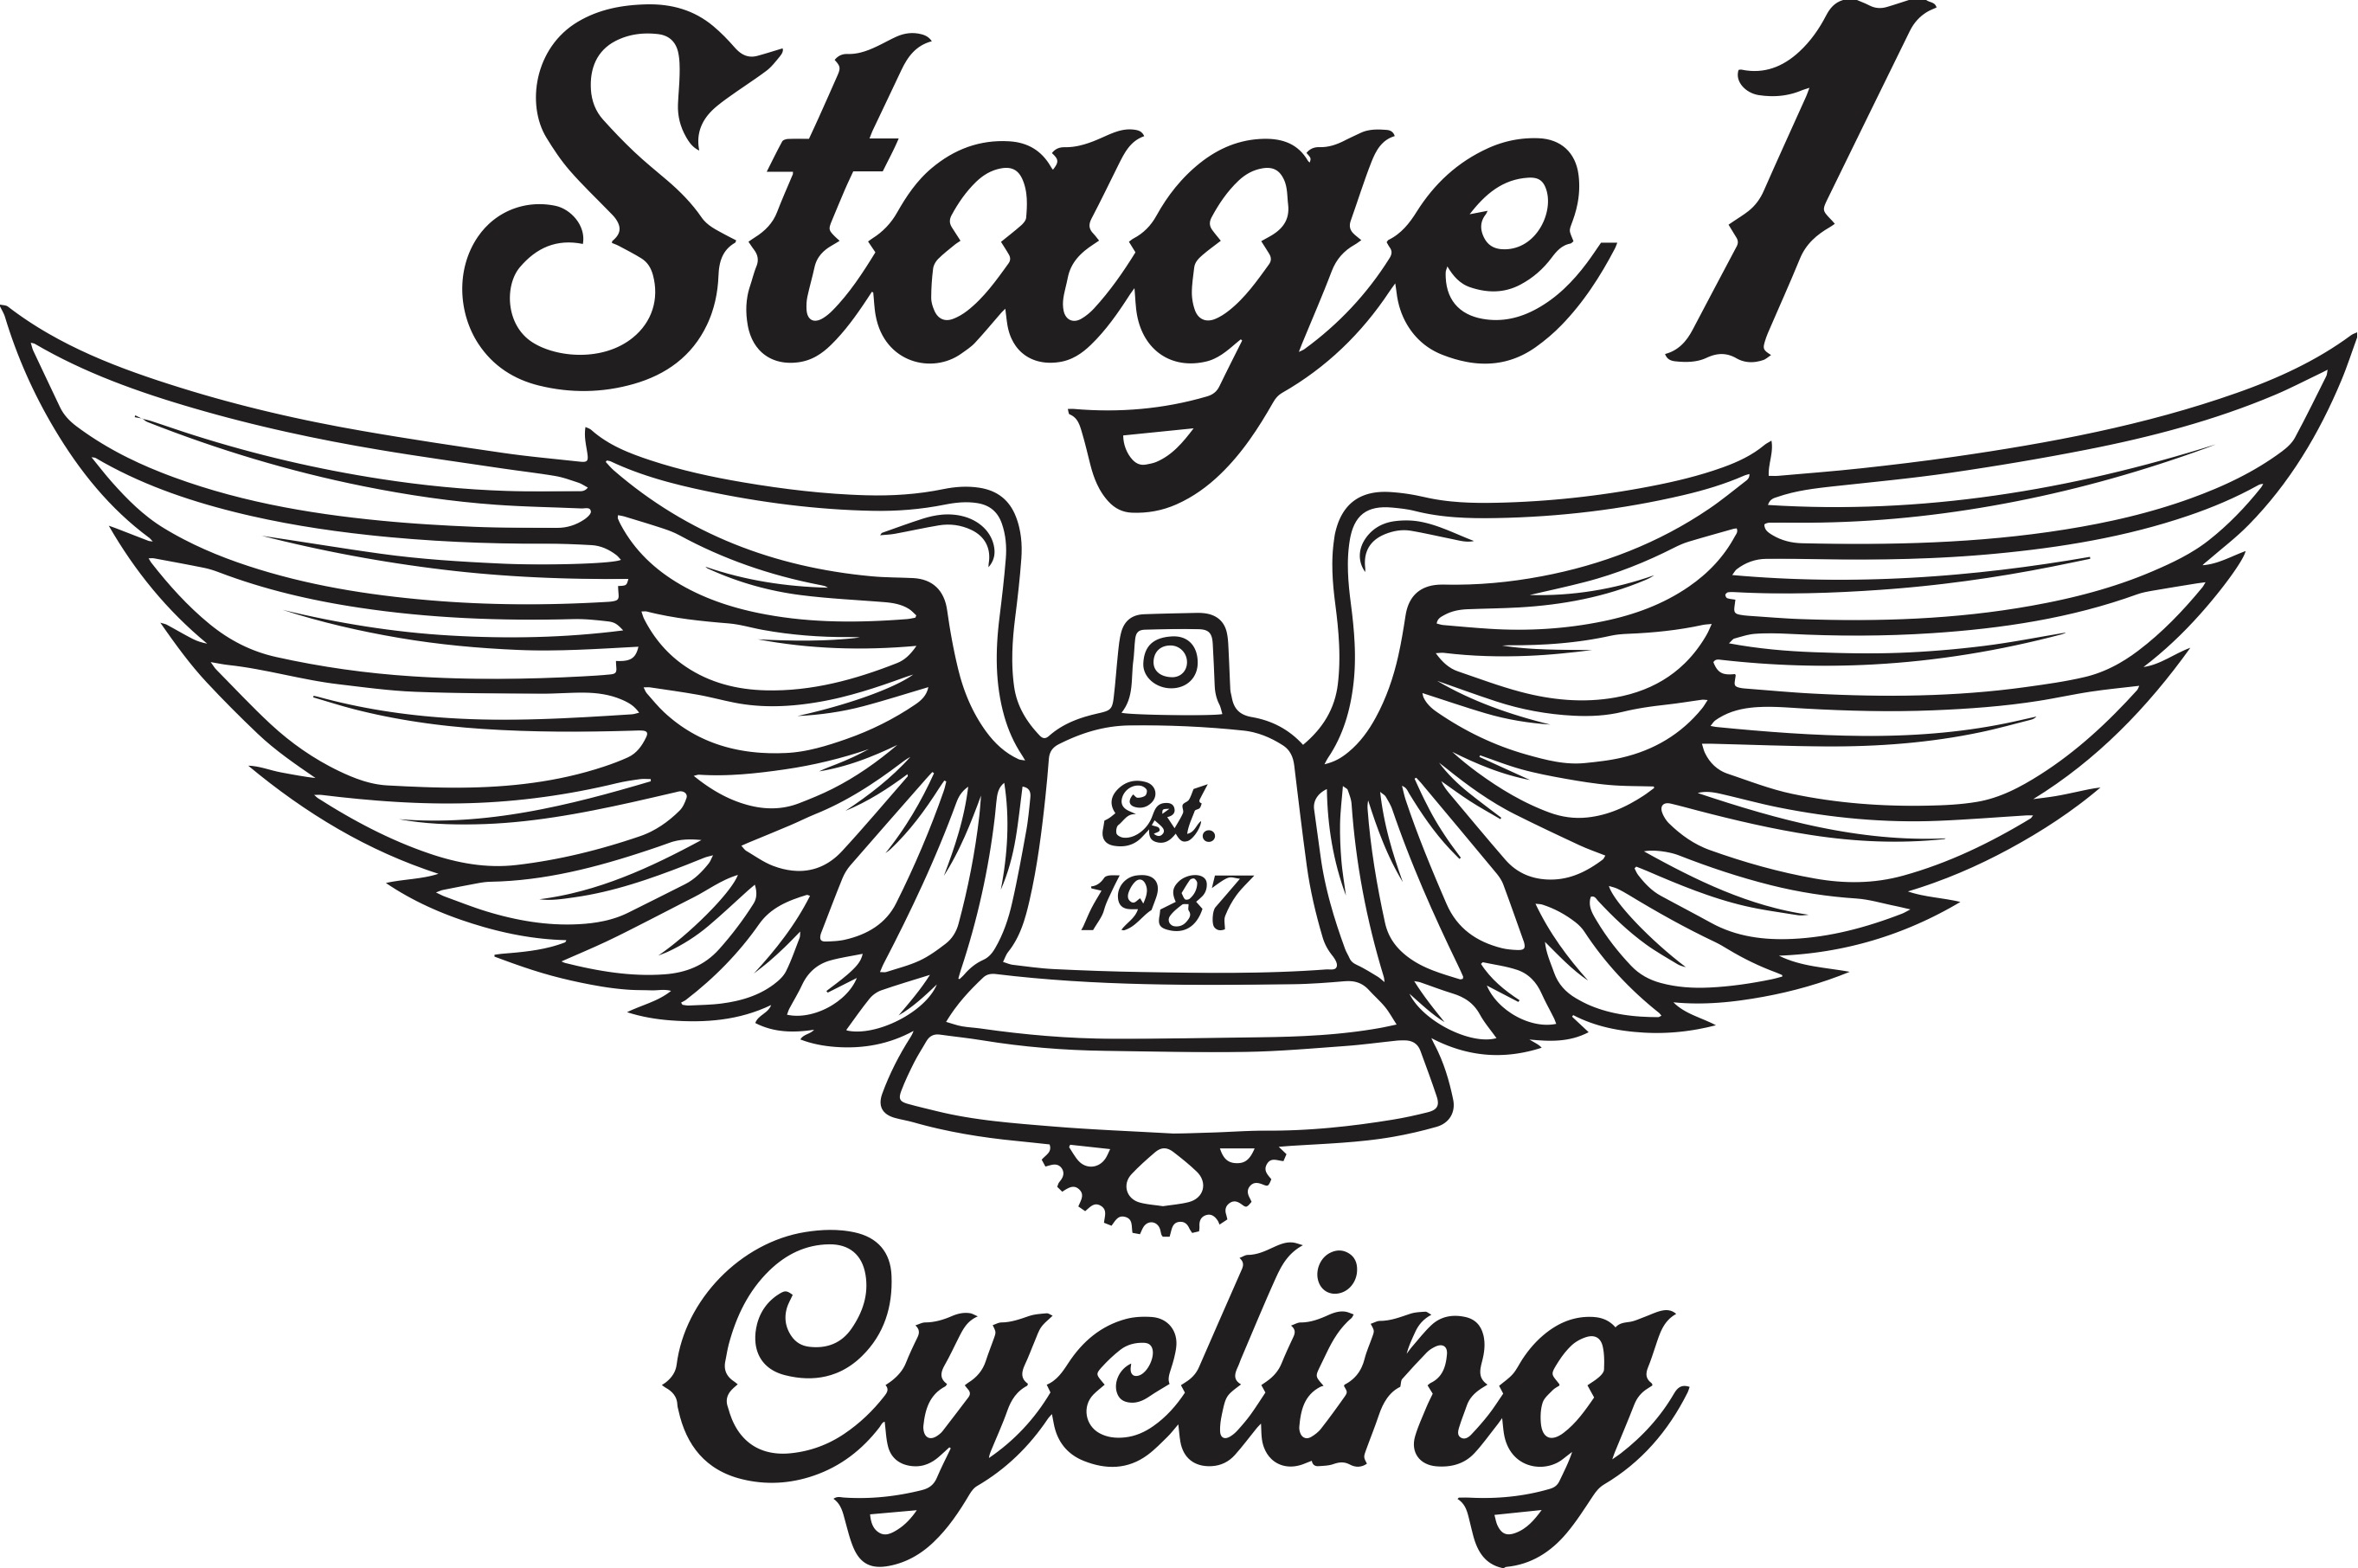 Stage 1 Cycles